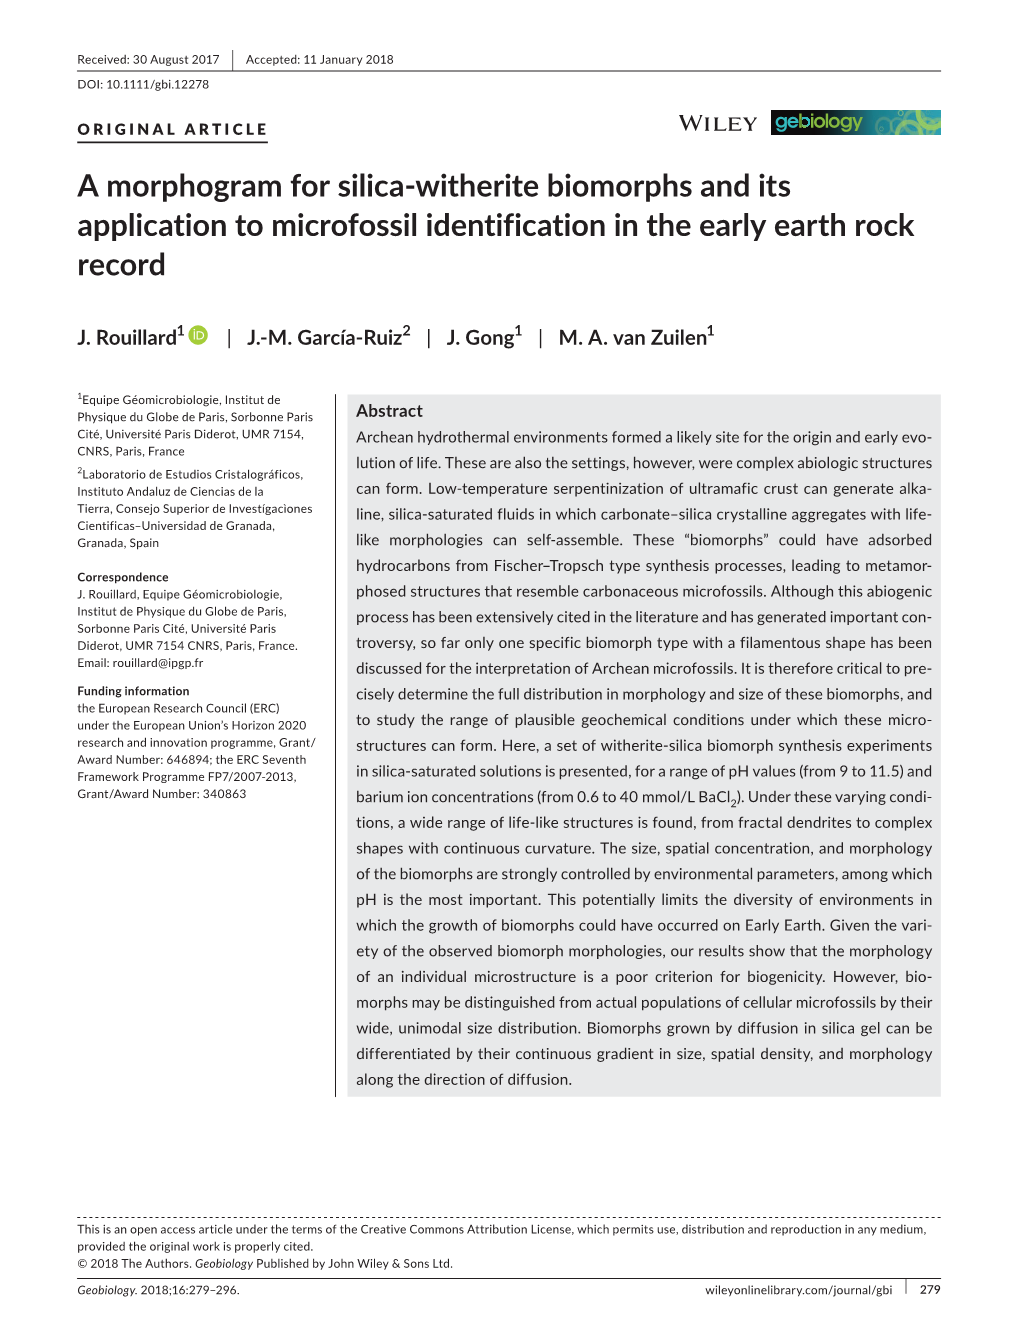 A Morphogram for Silica‐Witherite Biomorphs and Its Application To